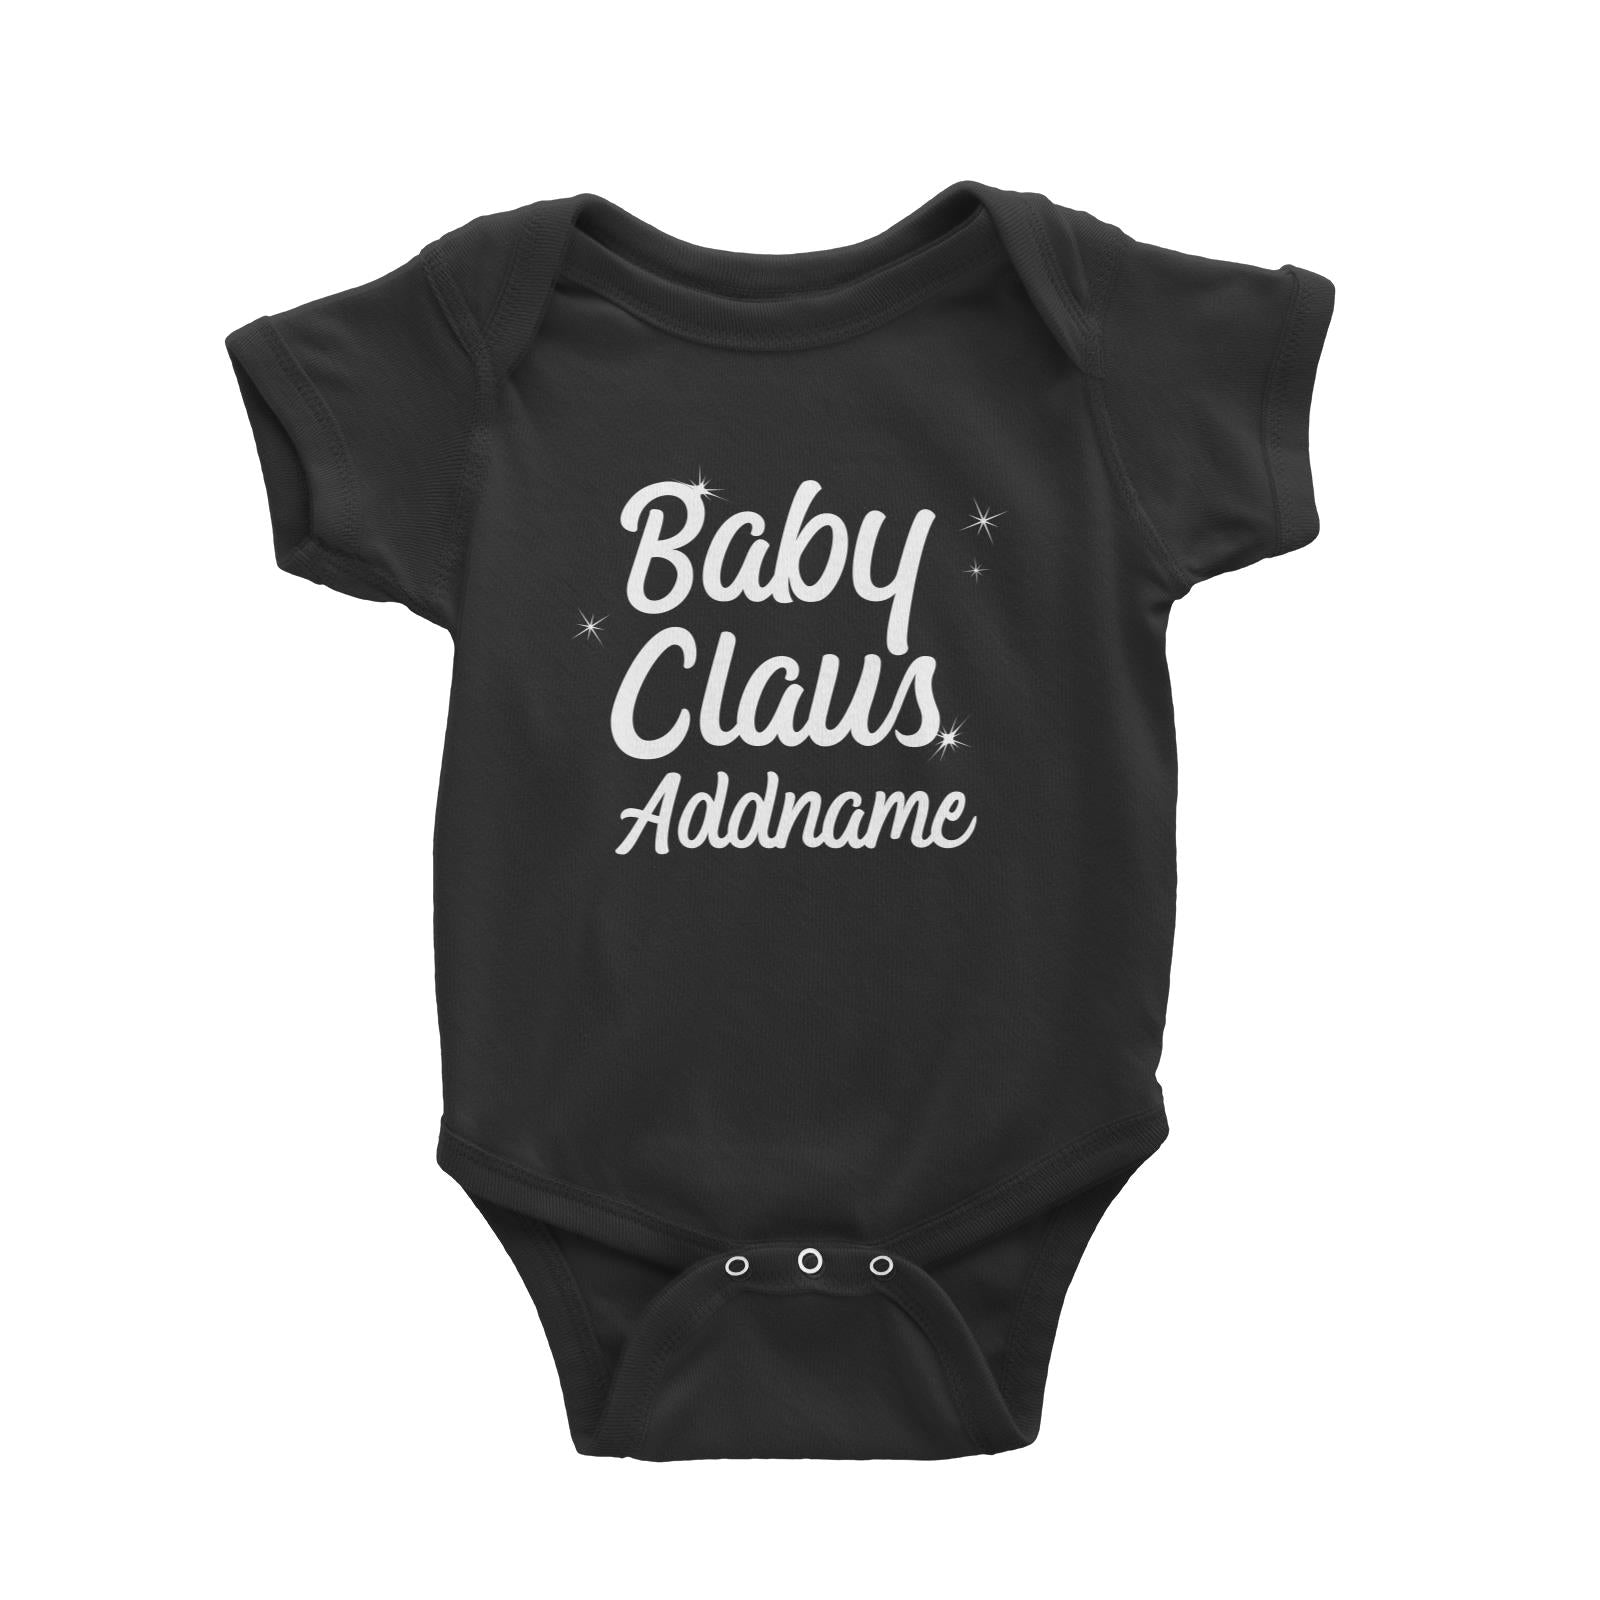 Christmas Series Baby Claus Baby Romper